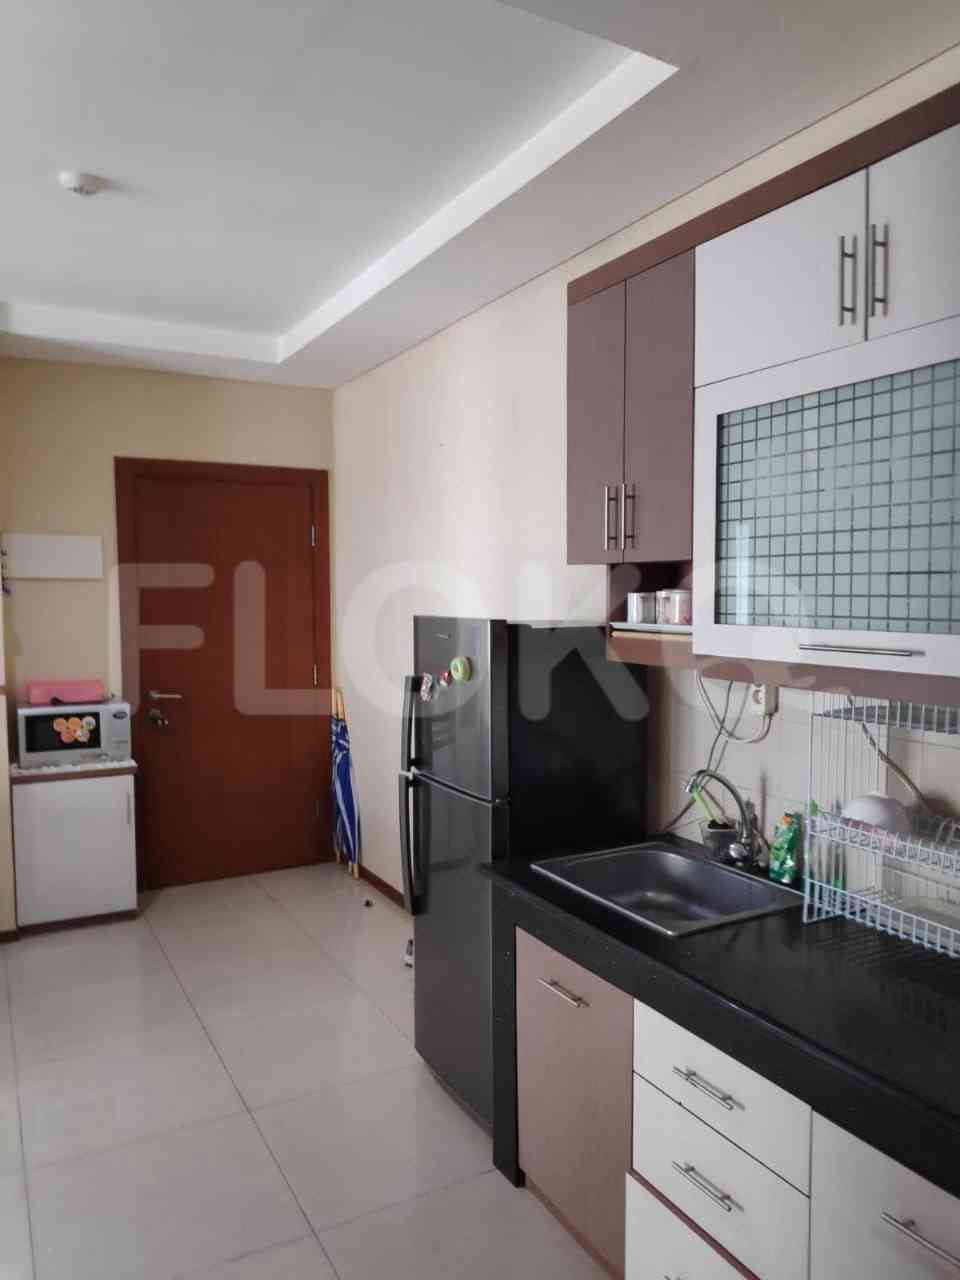 2 Bedroom on 17th Floor for Rent in Thamrin Residence Apartment - fth9a0 1